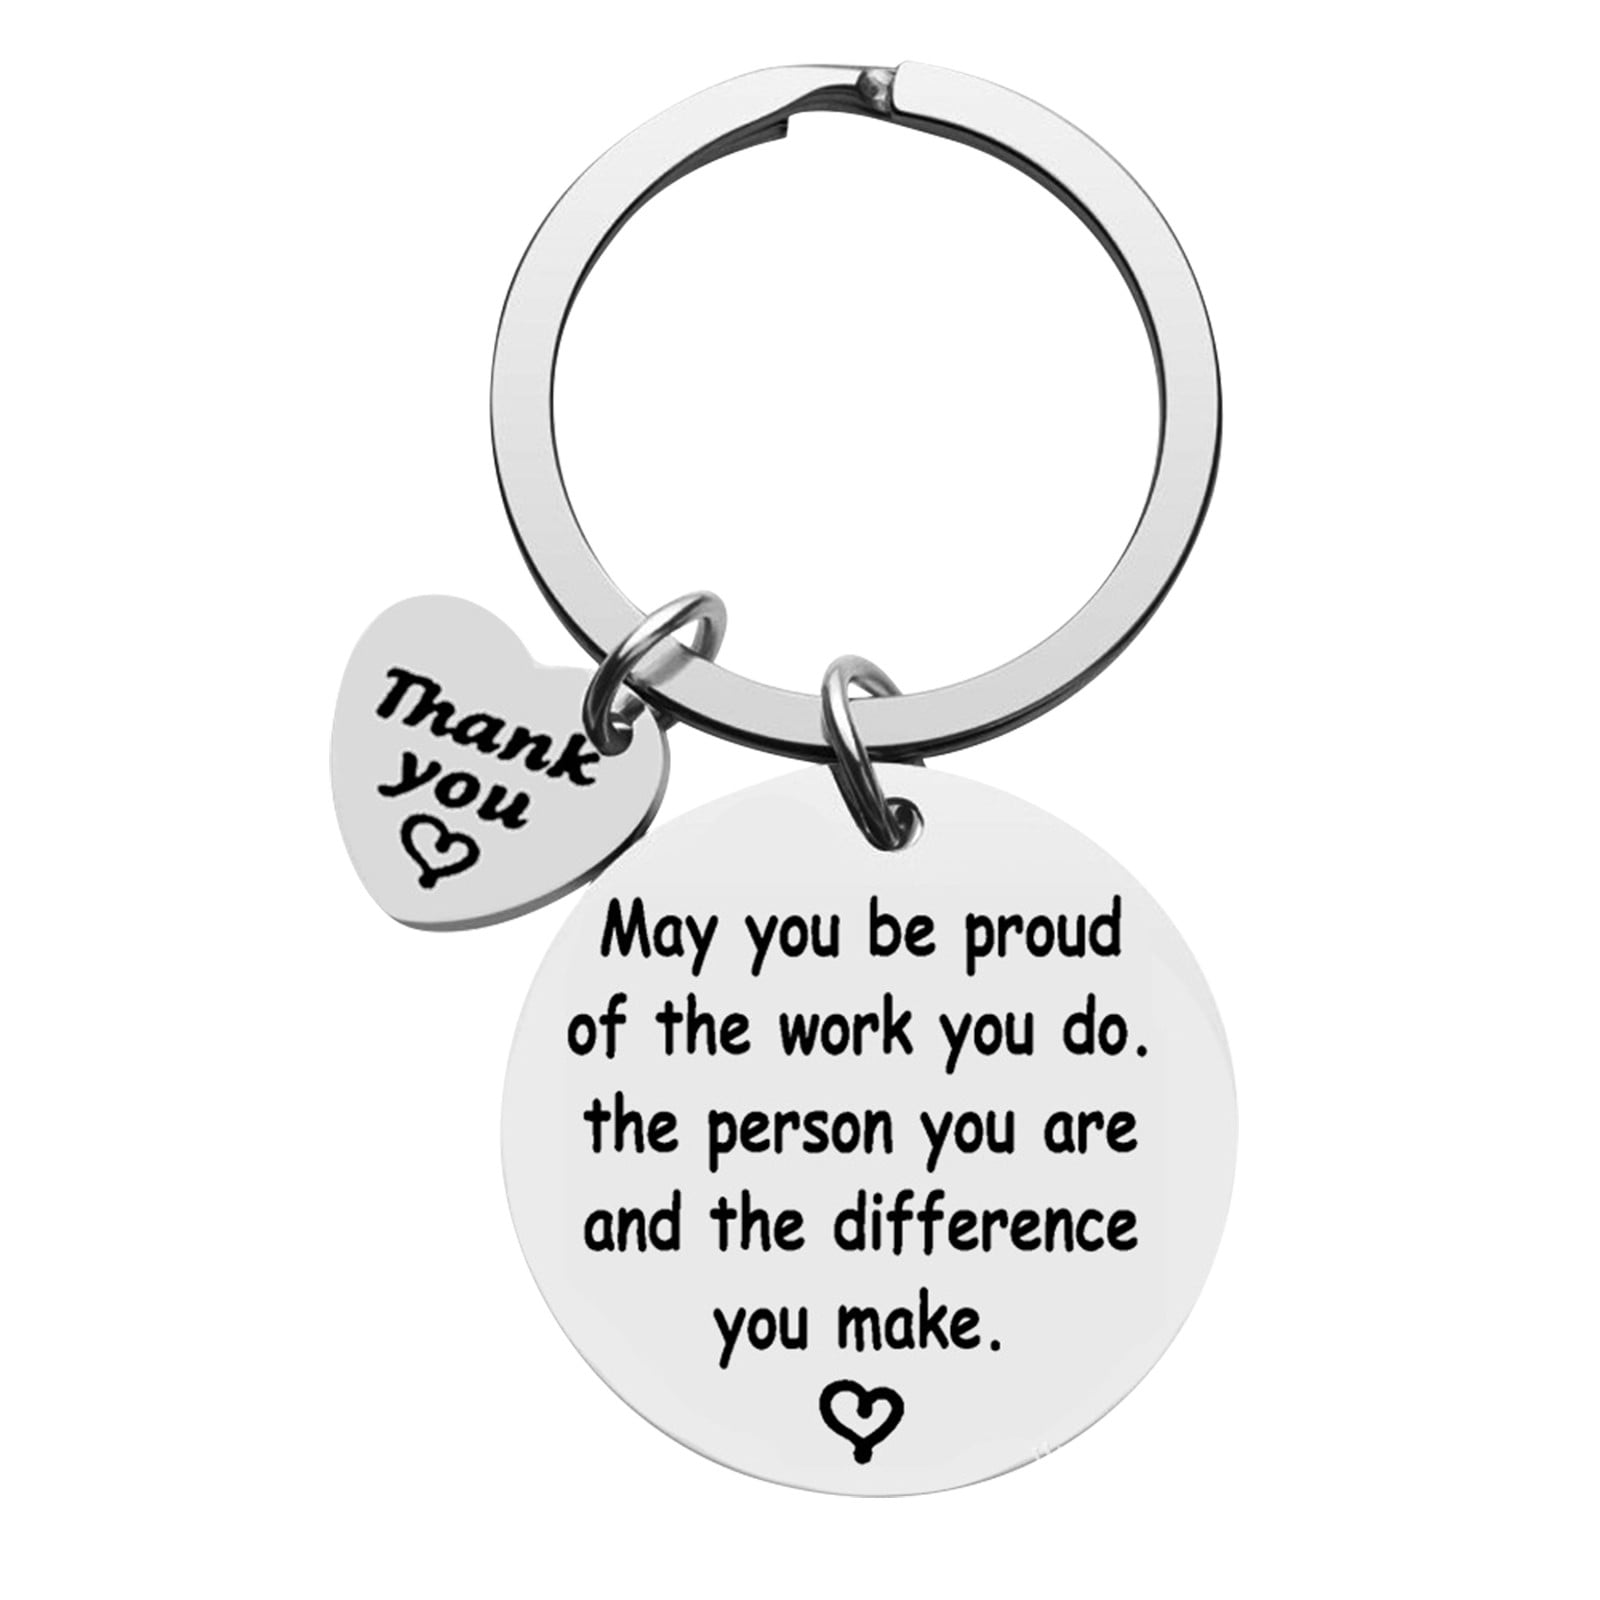 DEGASKEN Best Neighbor Ever Gifts, Funny Gifts for Neighbor, Unique Metal Keychain for Neighbor Farewell Going Away, Women's, Size: Pendant 2* 1.2